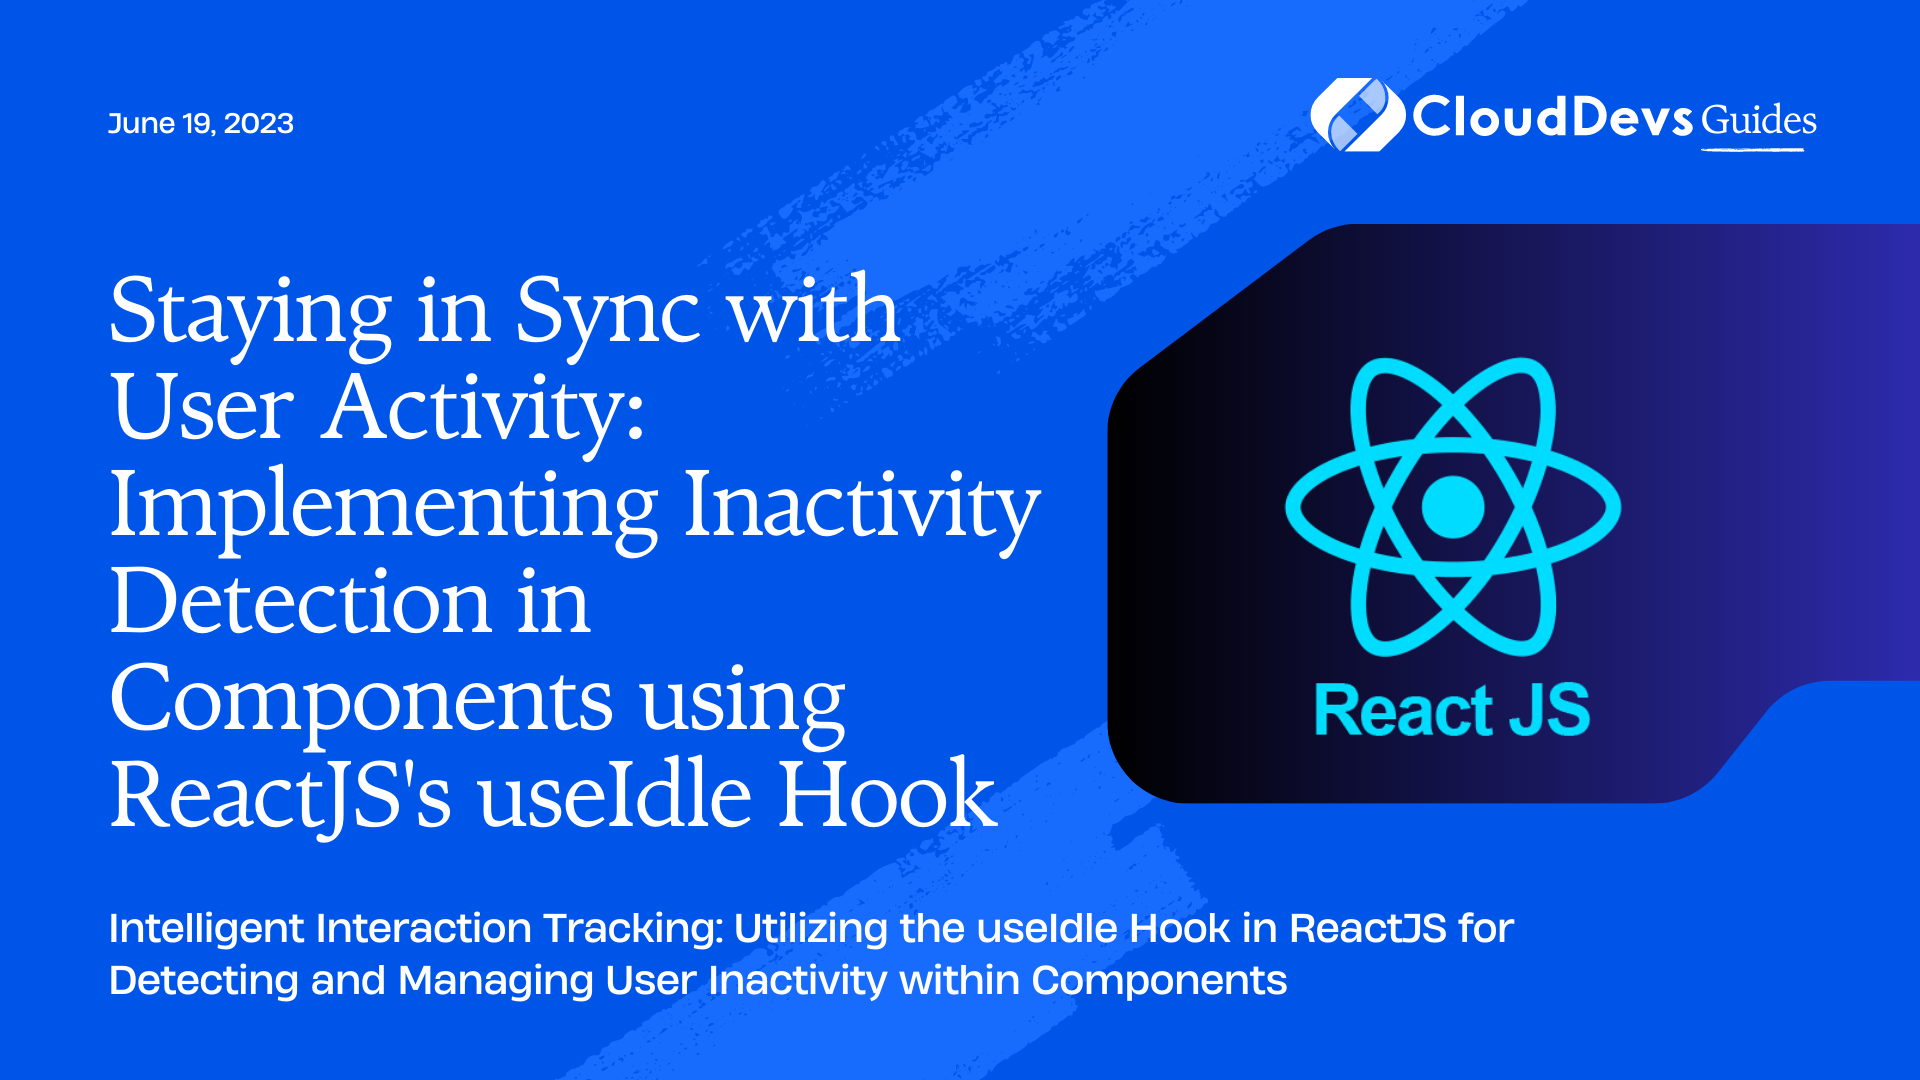 Staying in Sync with User Activity: Implementing Inactivity Detection in Components using ReactJS's useIdle Hook